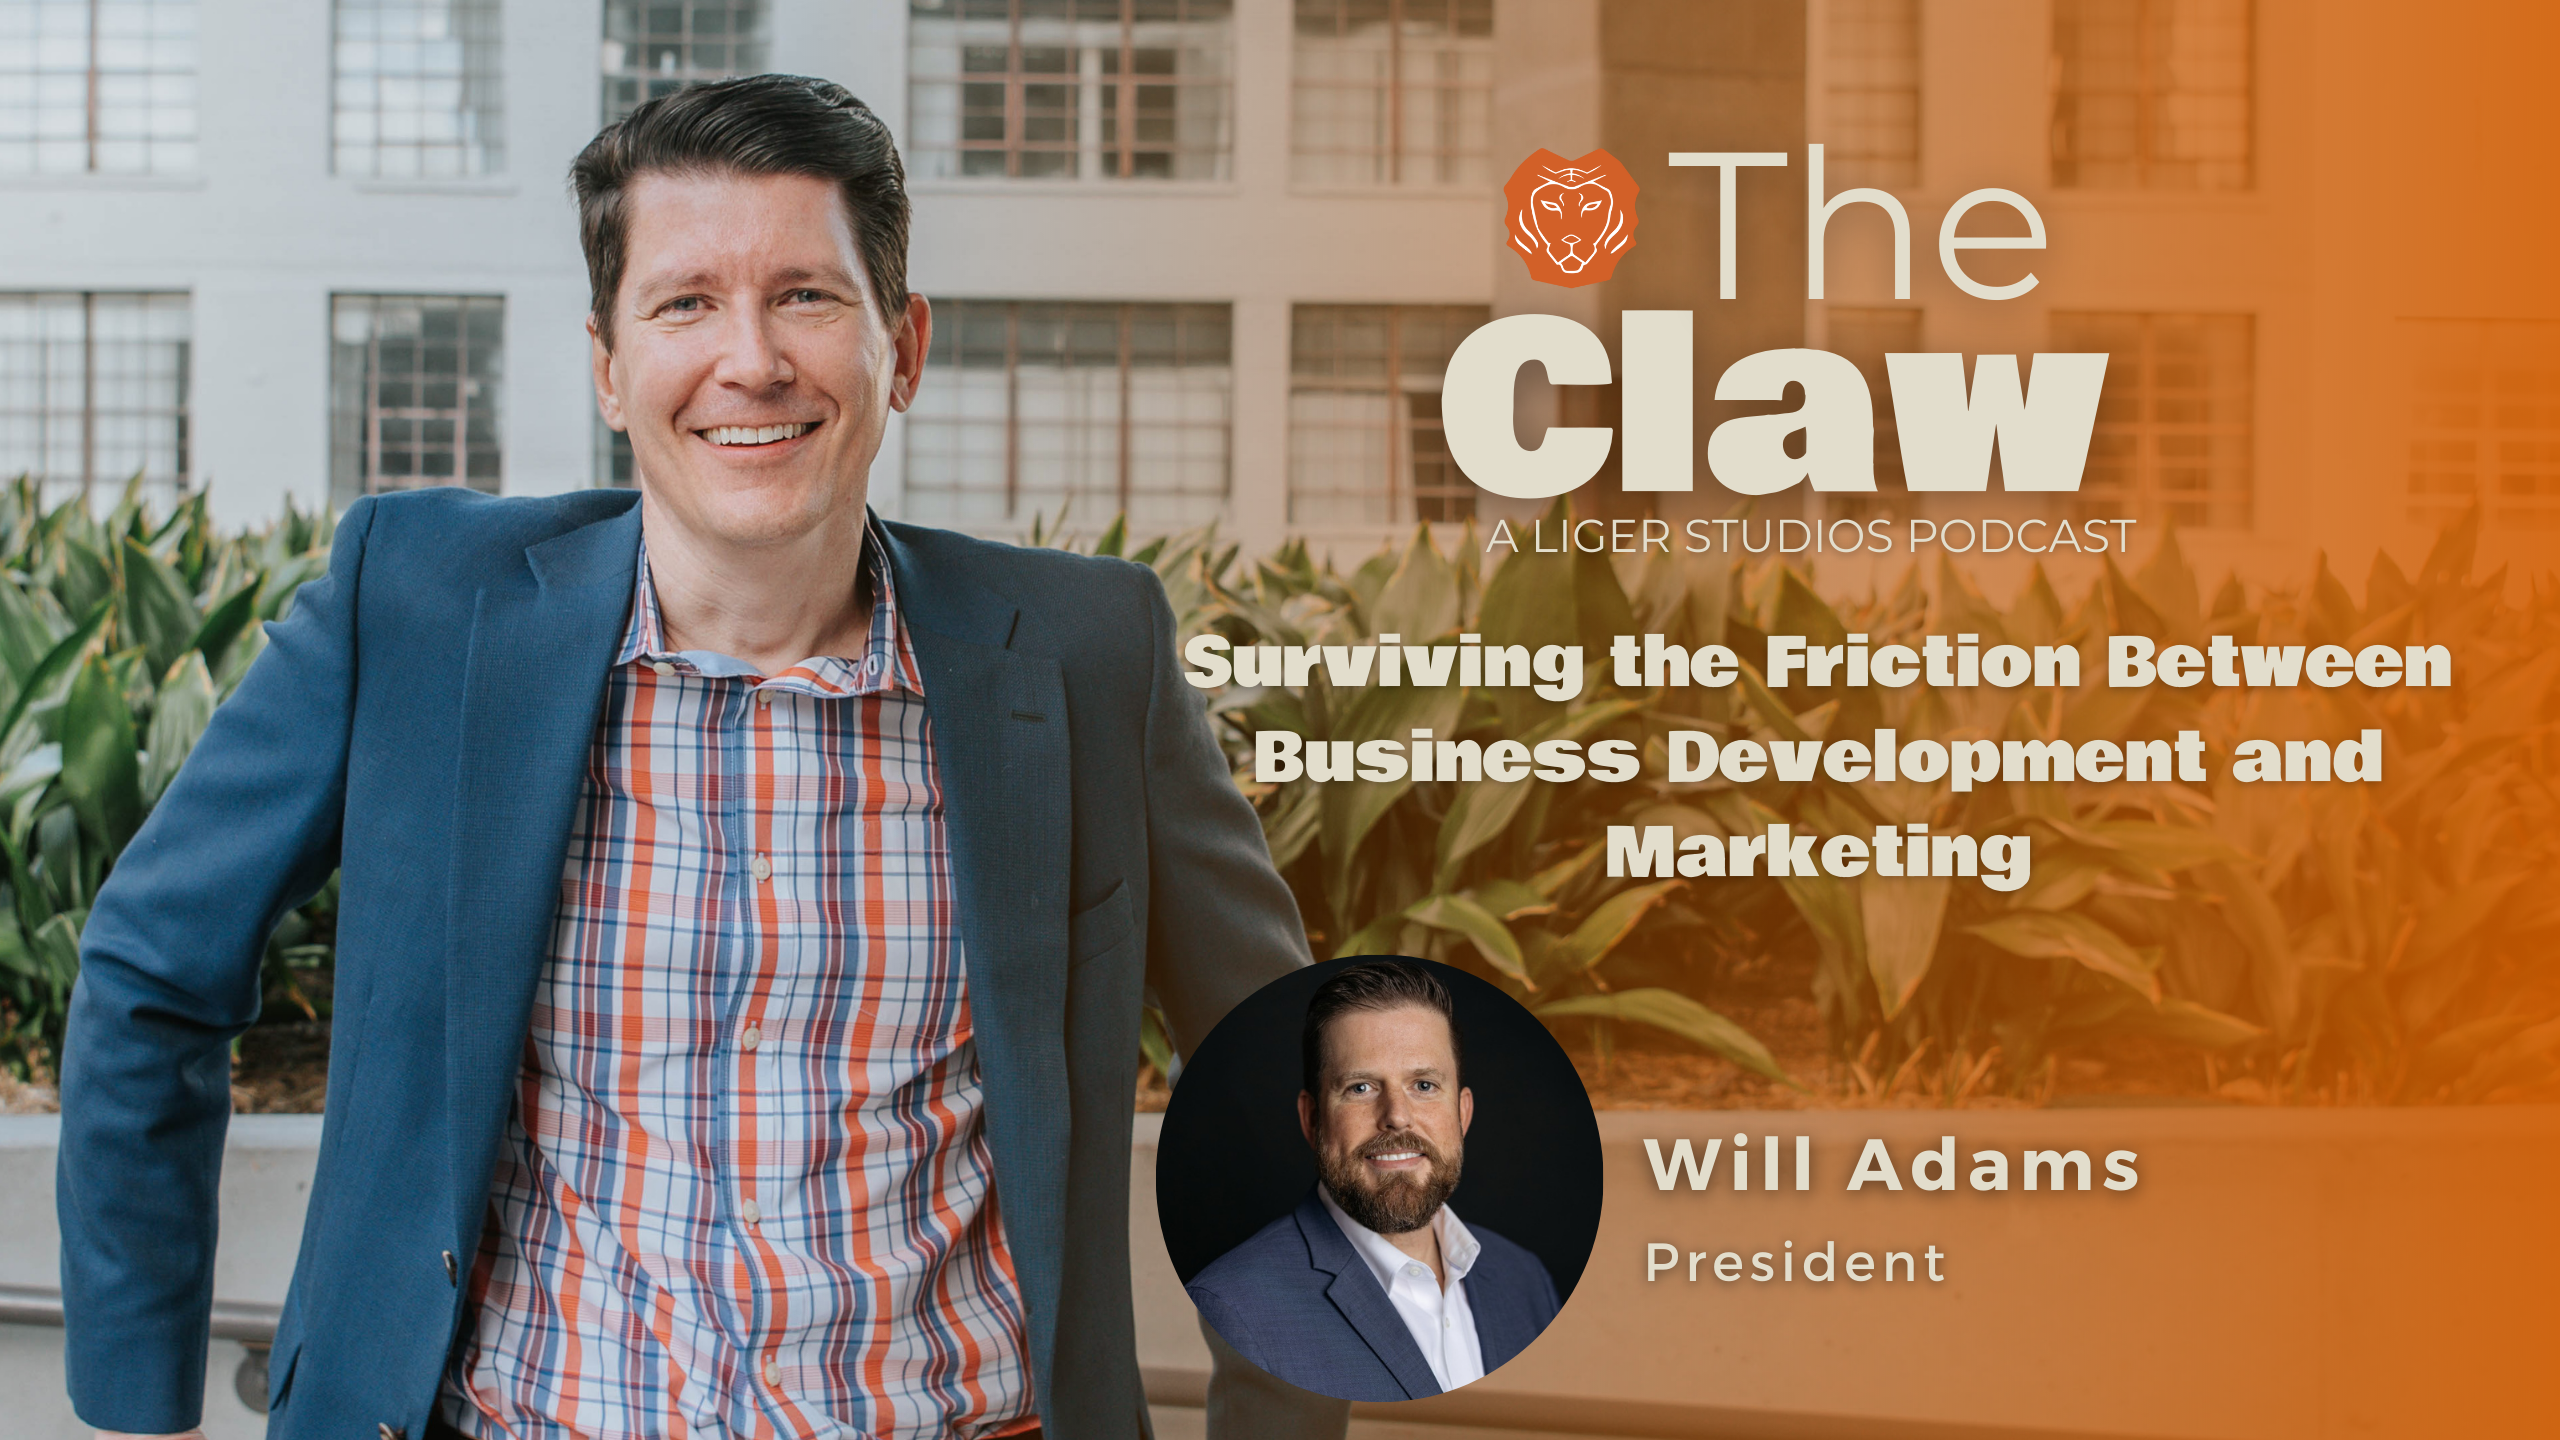 The Claw Podcast: Surviving the Friction Between Business Development and Marketing Part 2